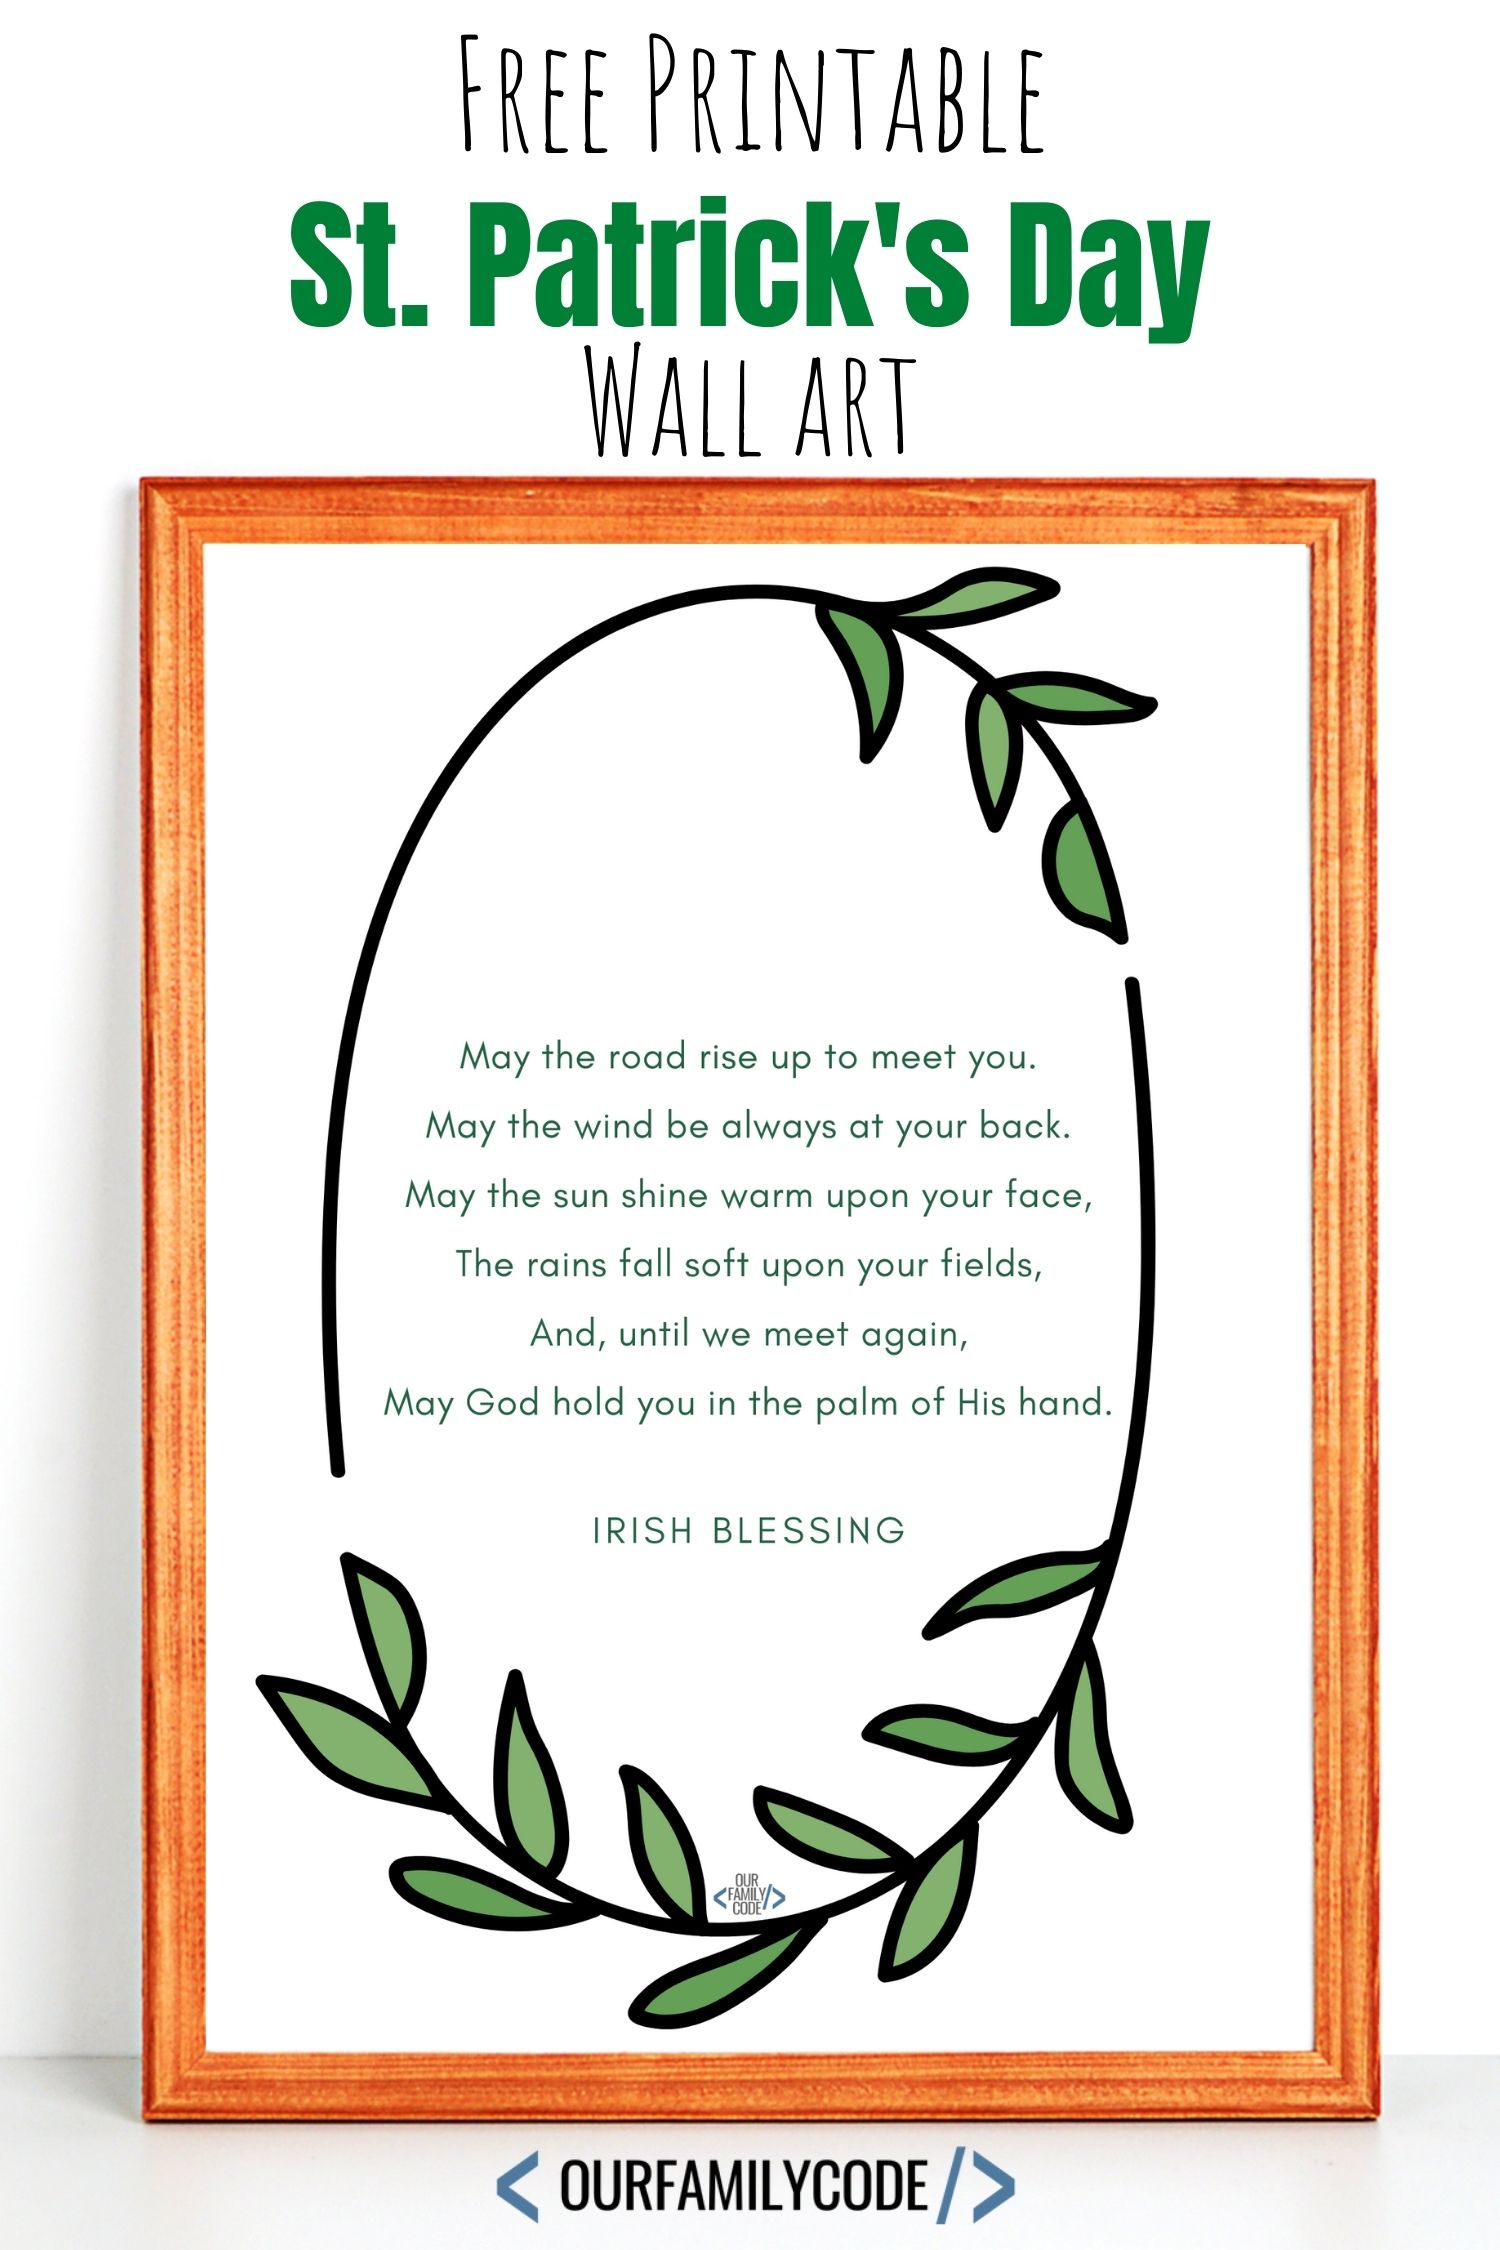 A picture of a printable wall art image with the Irish Blessing "May the Road Rise up to Meet You".